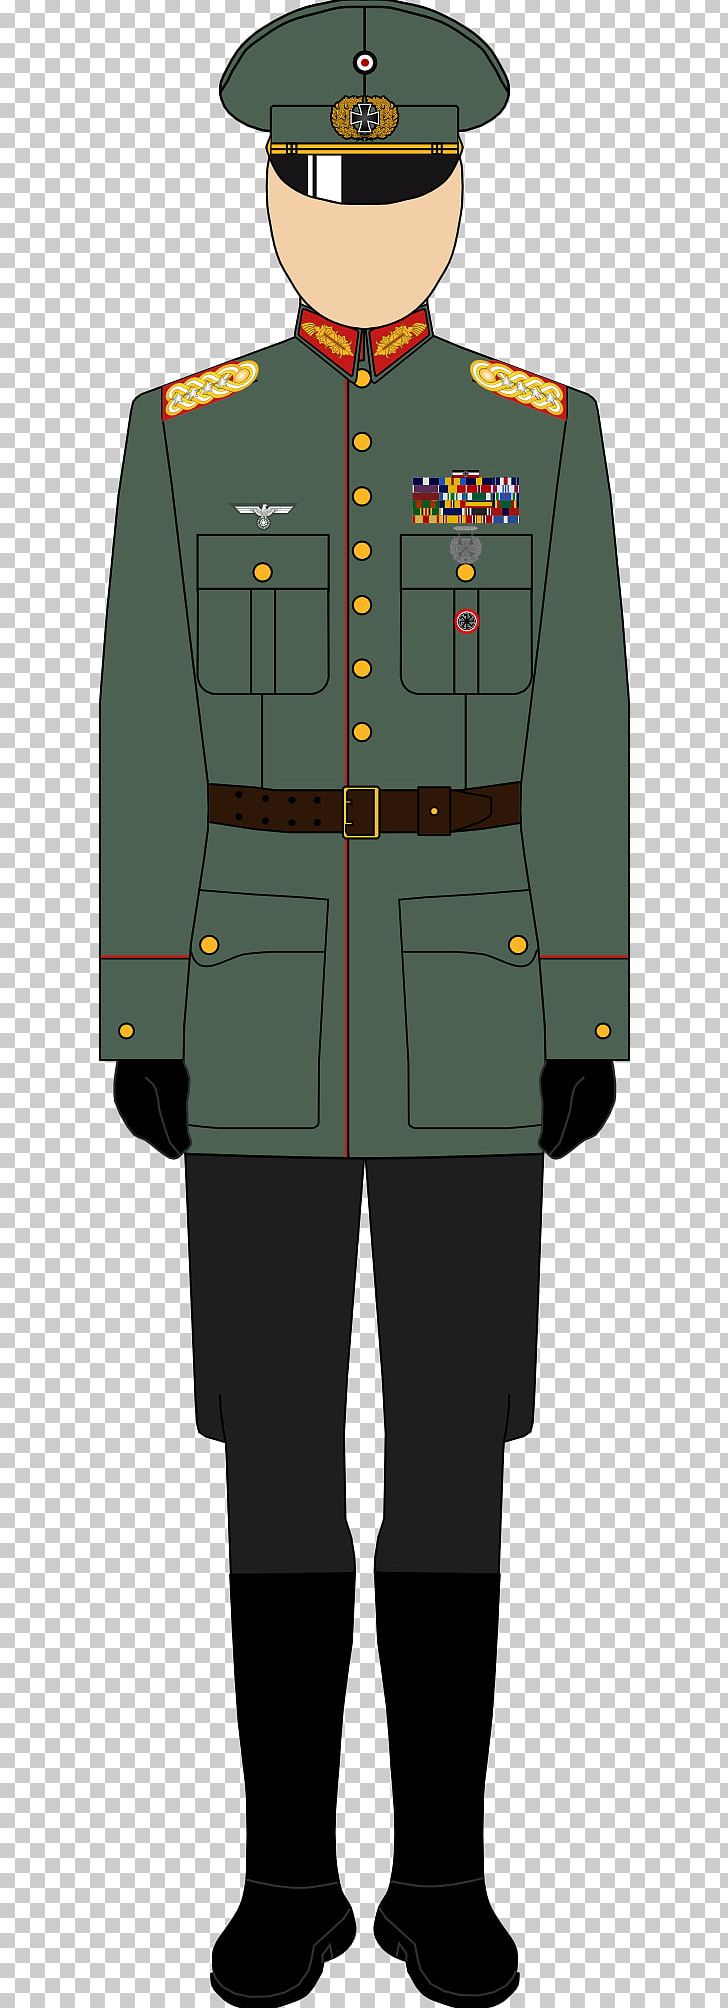 Military Uniform Army Officer Dress Uniform General PNG, Clipart, Admiral, Army, Army Officer, Army Service Uniform, Clothing Free PNG Download